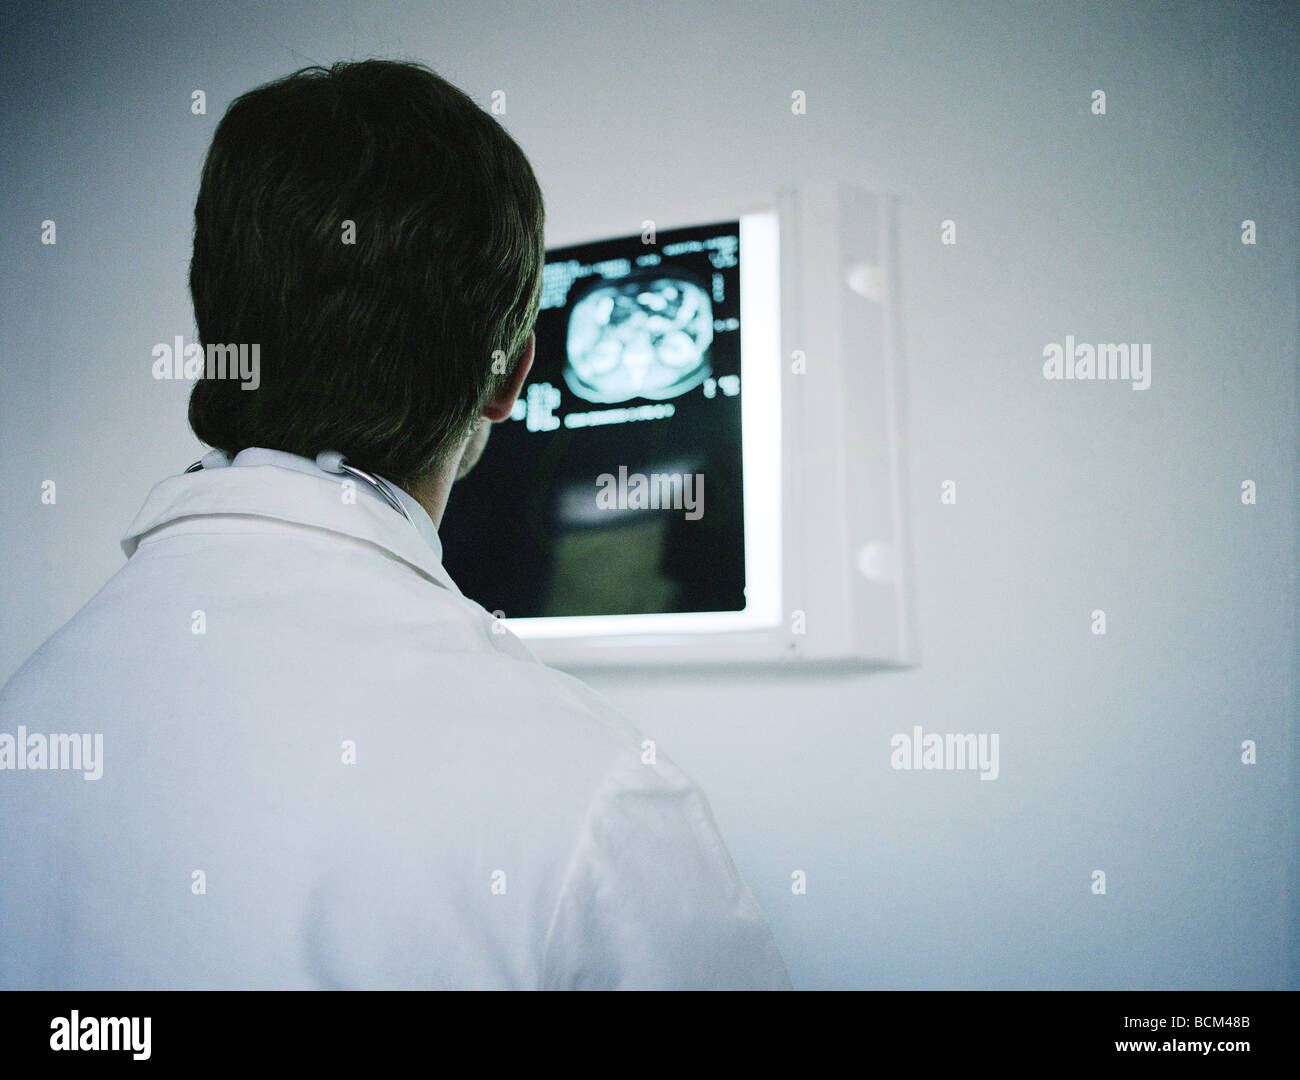 Doctor looking at MRI image, over the shoulder view Stock Photo